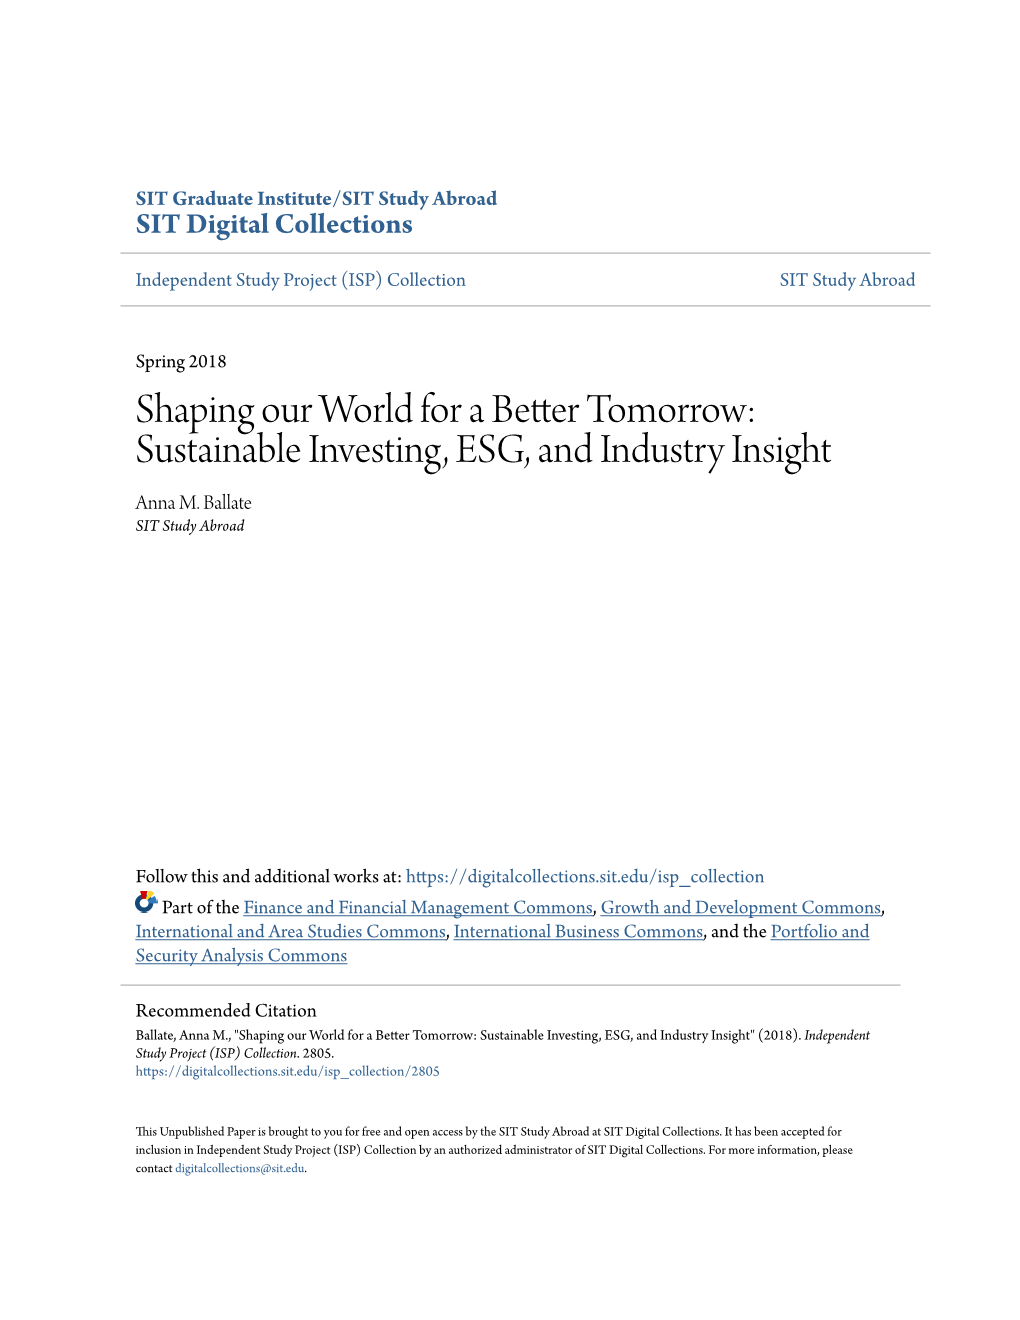 Sustainable Investing, ESG, and Industry Insight Anna M